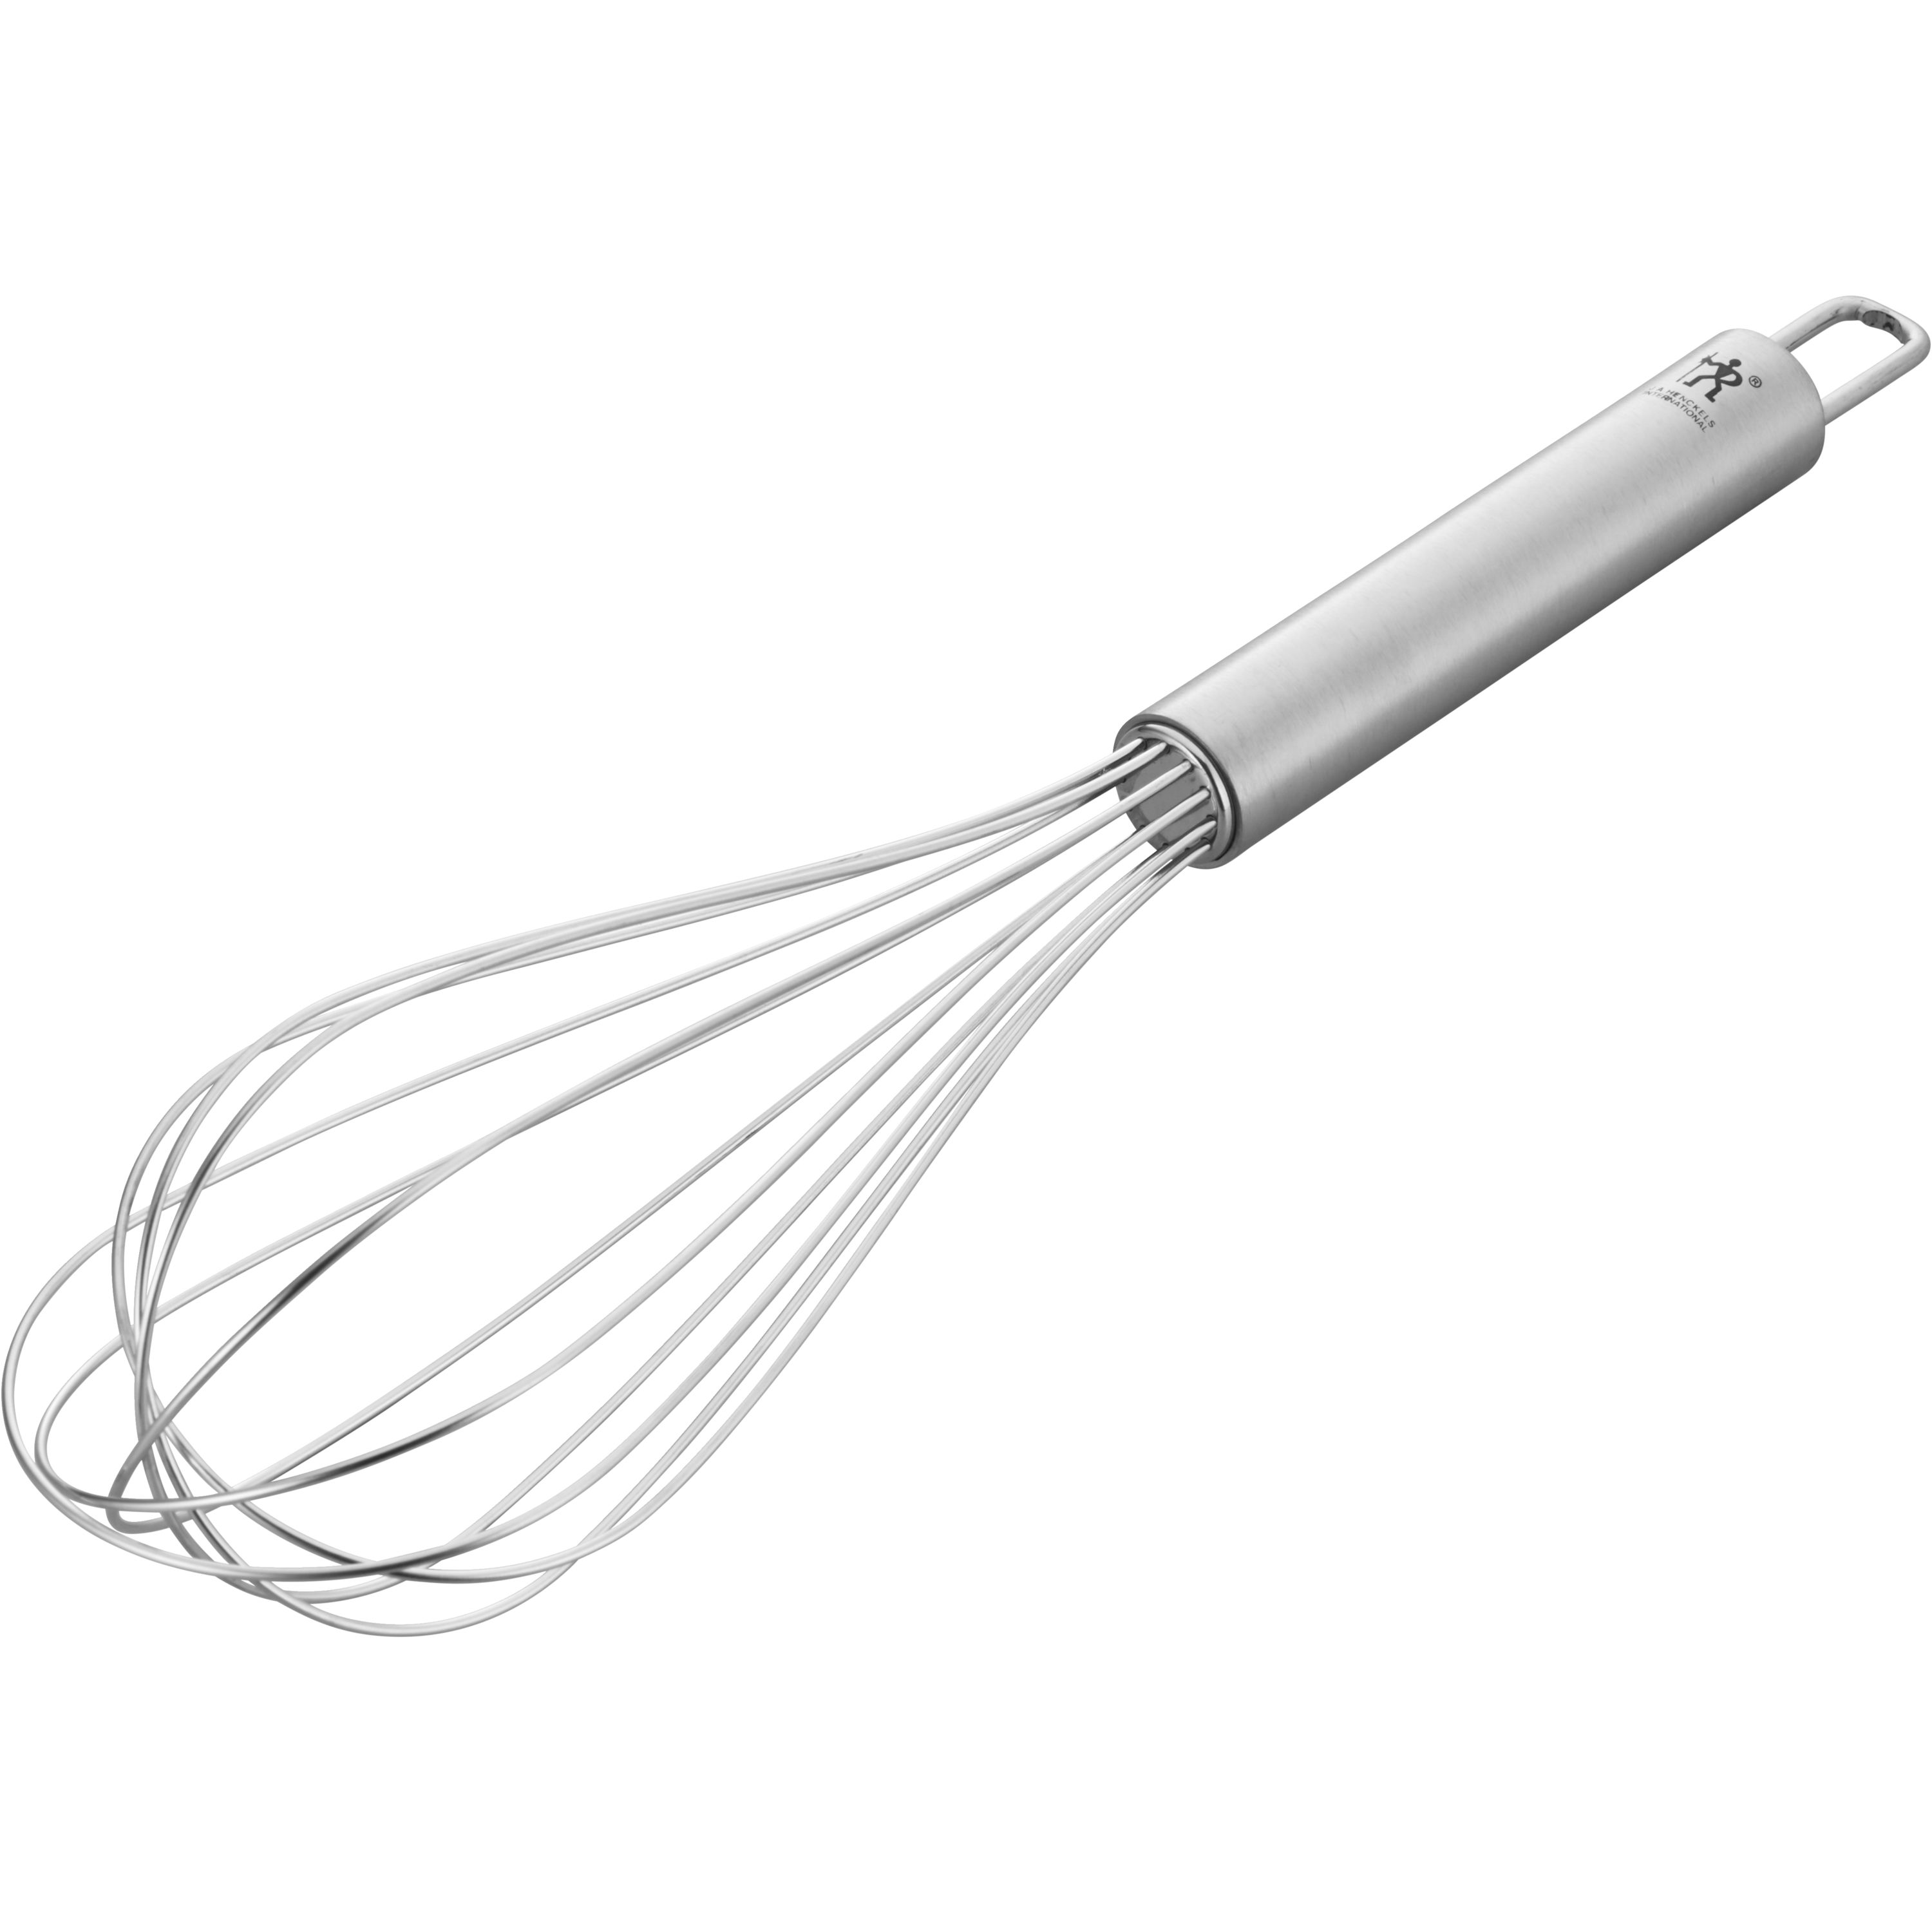 50 Best Baking Tools From Kitchen Scales to Whisks